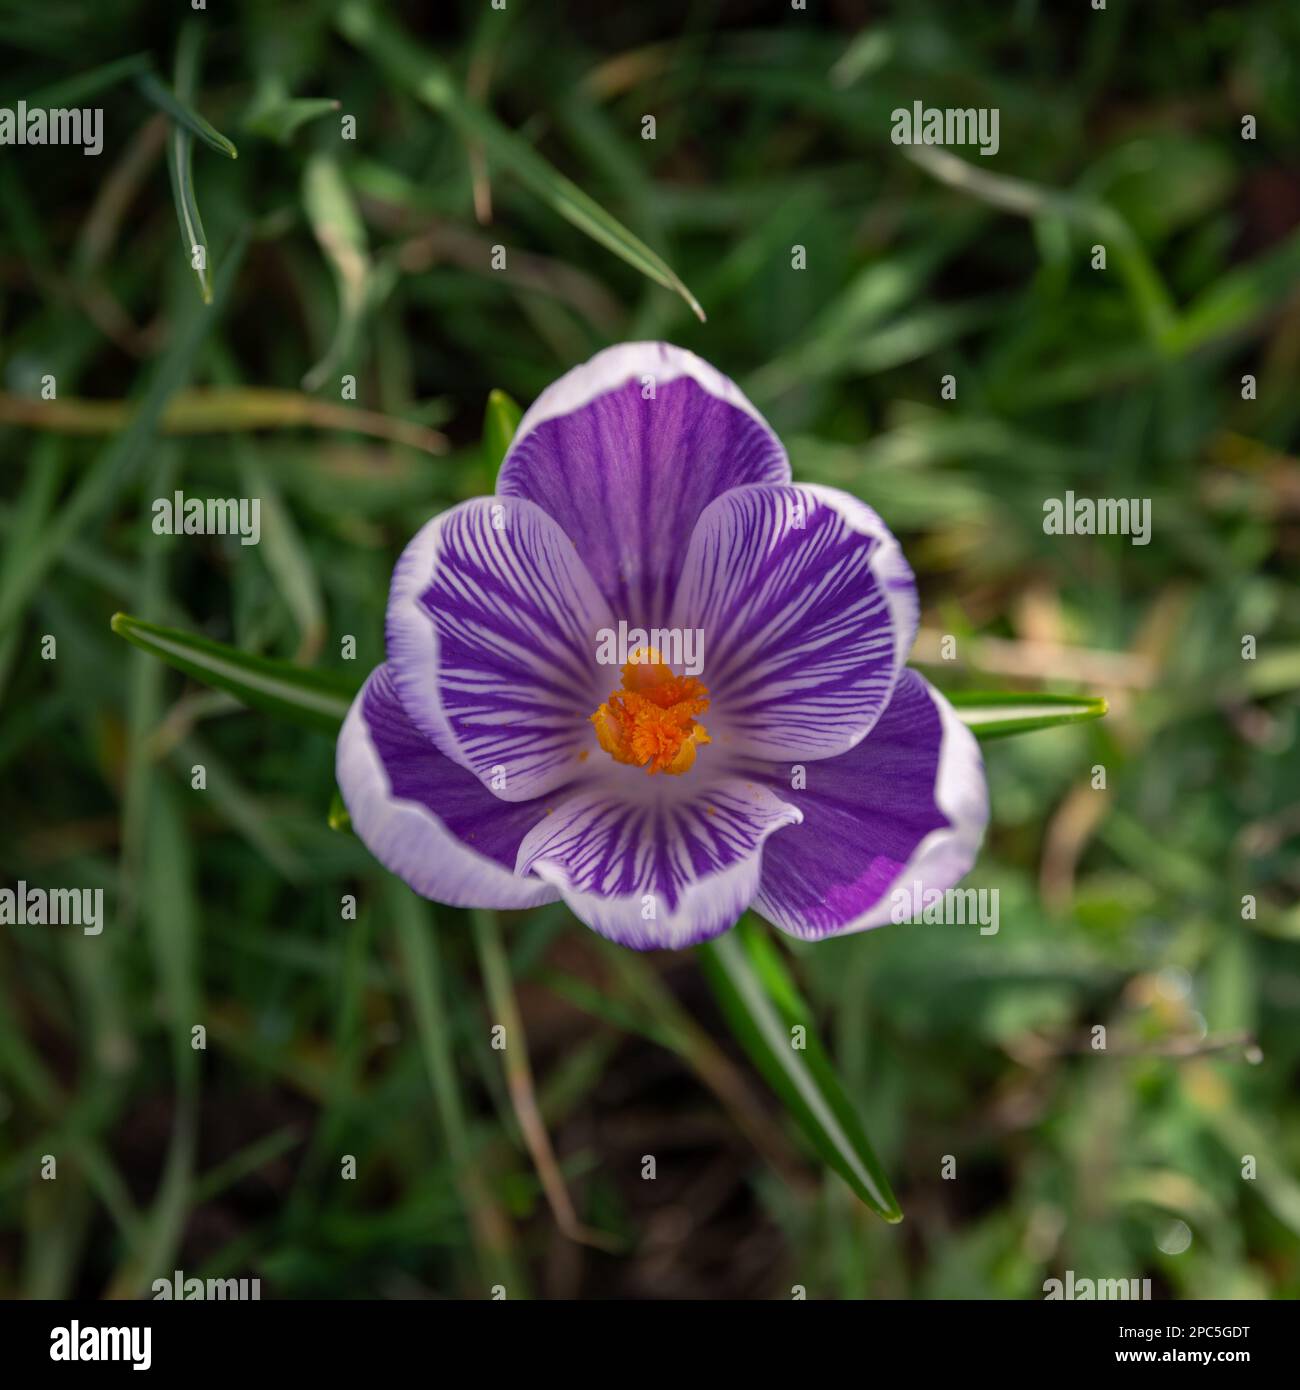 Purple crocus in the centre of the image, photograph. Spring. Crocus flower in bloom. Stock Photo